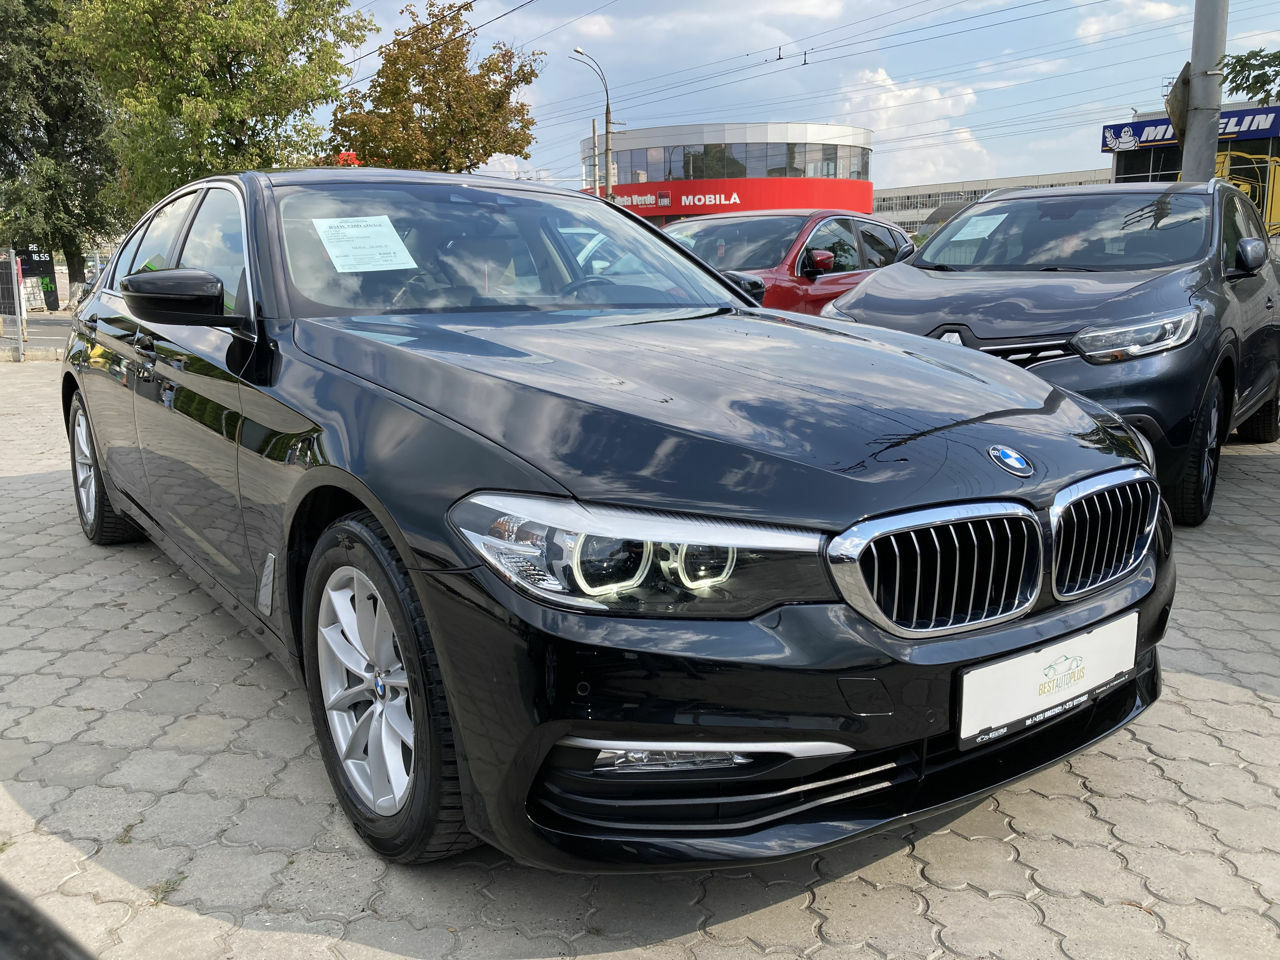 <span style="font-weight: bold;">bmw 520d xdrive</span>